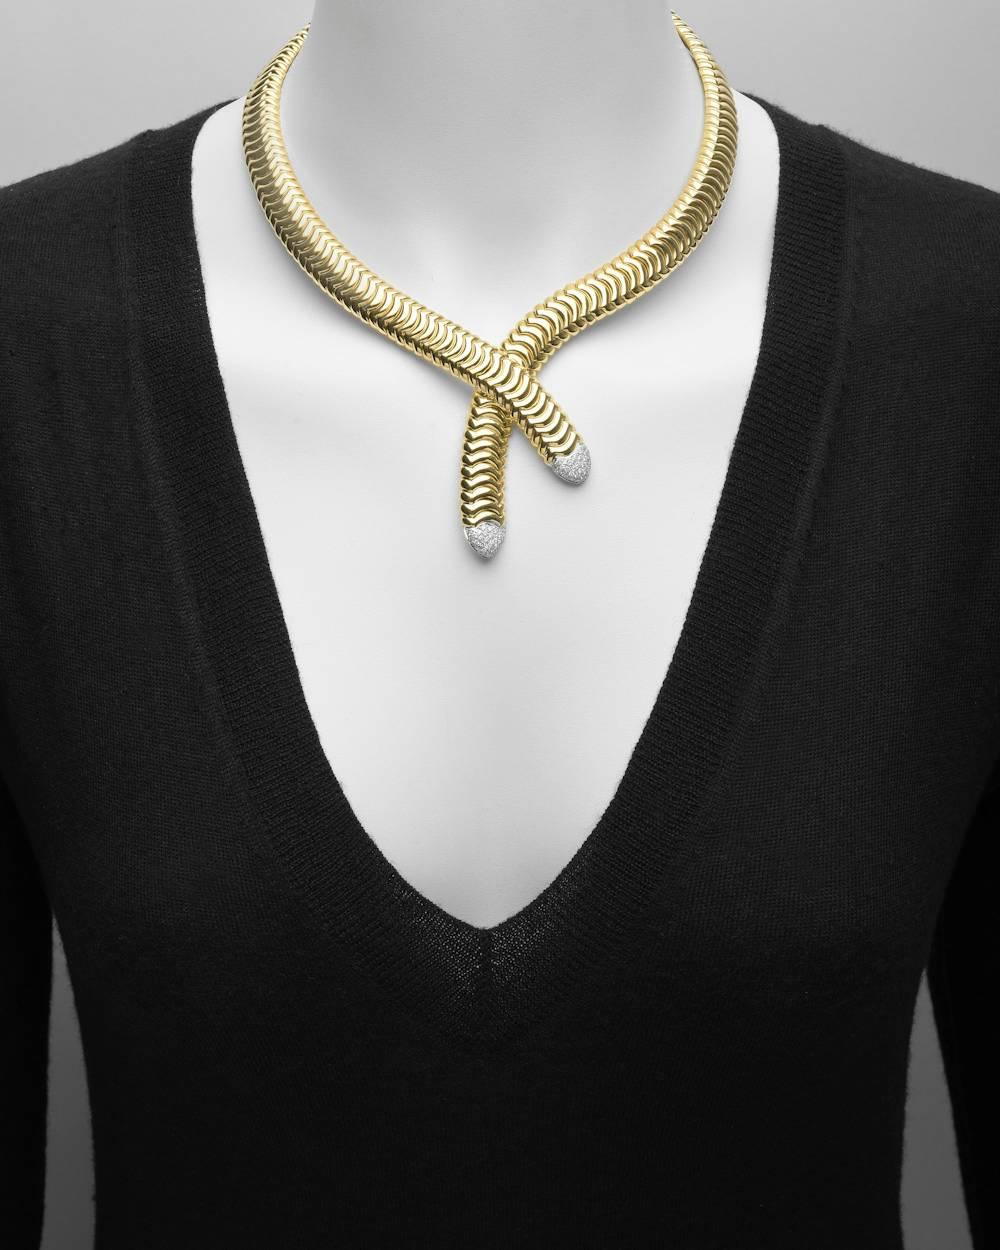 Crossover-style collar necklace in polished 18k yellow gold, the ends pavé-set with sixty near-colorless round brilliant-cut diamonds weighing approximately 0.78 total carats (G color, VVS-VS clarity), signed Garavelli. 16.5